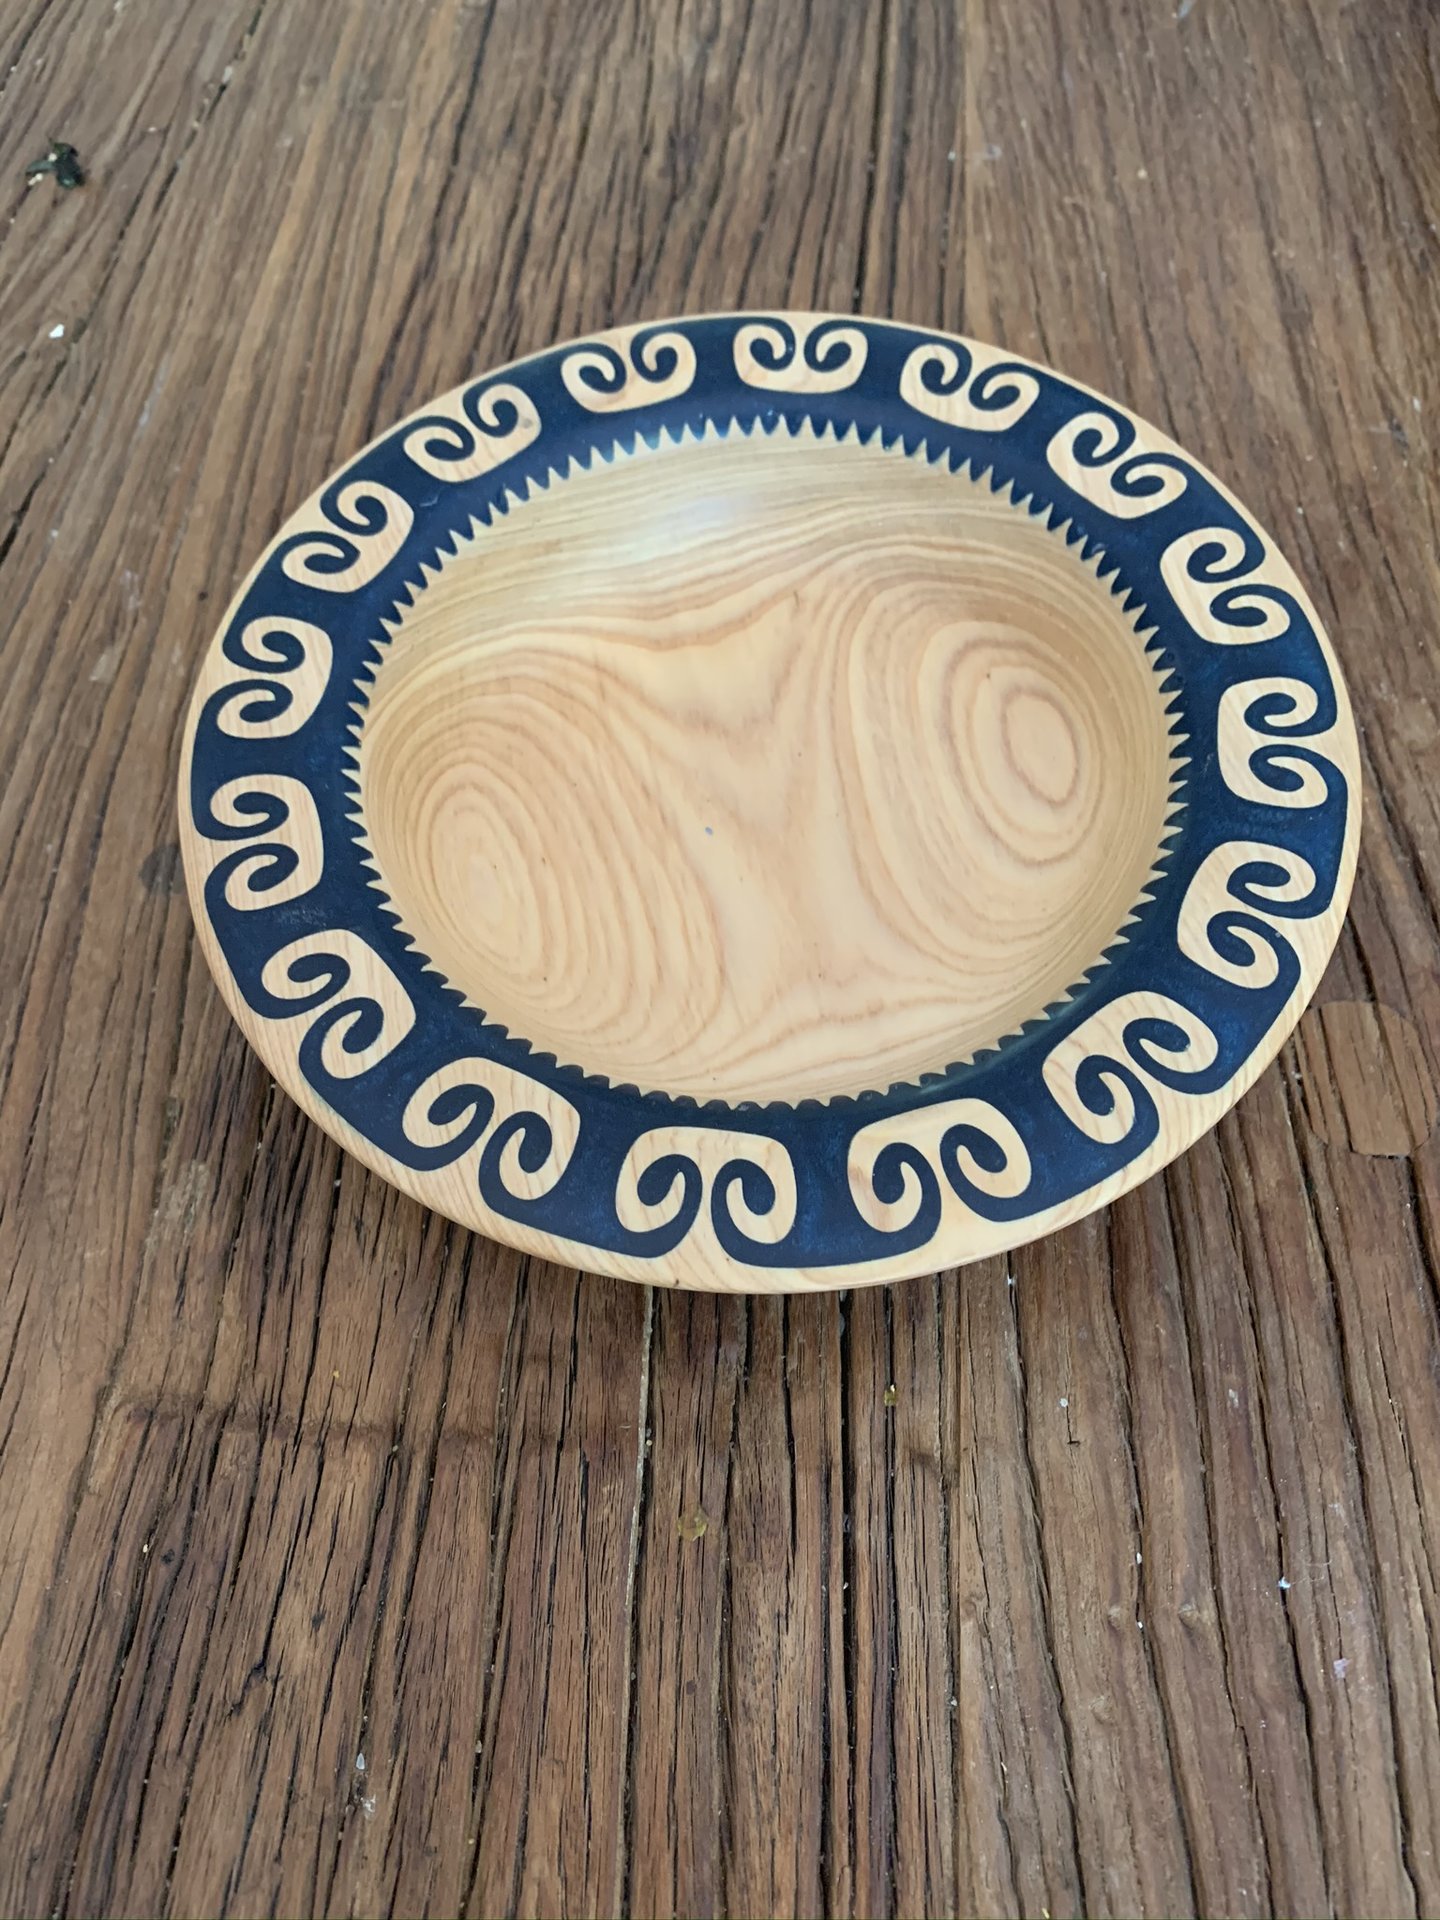 Cypress bowl with inlays